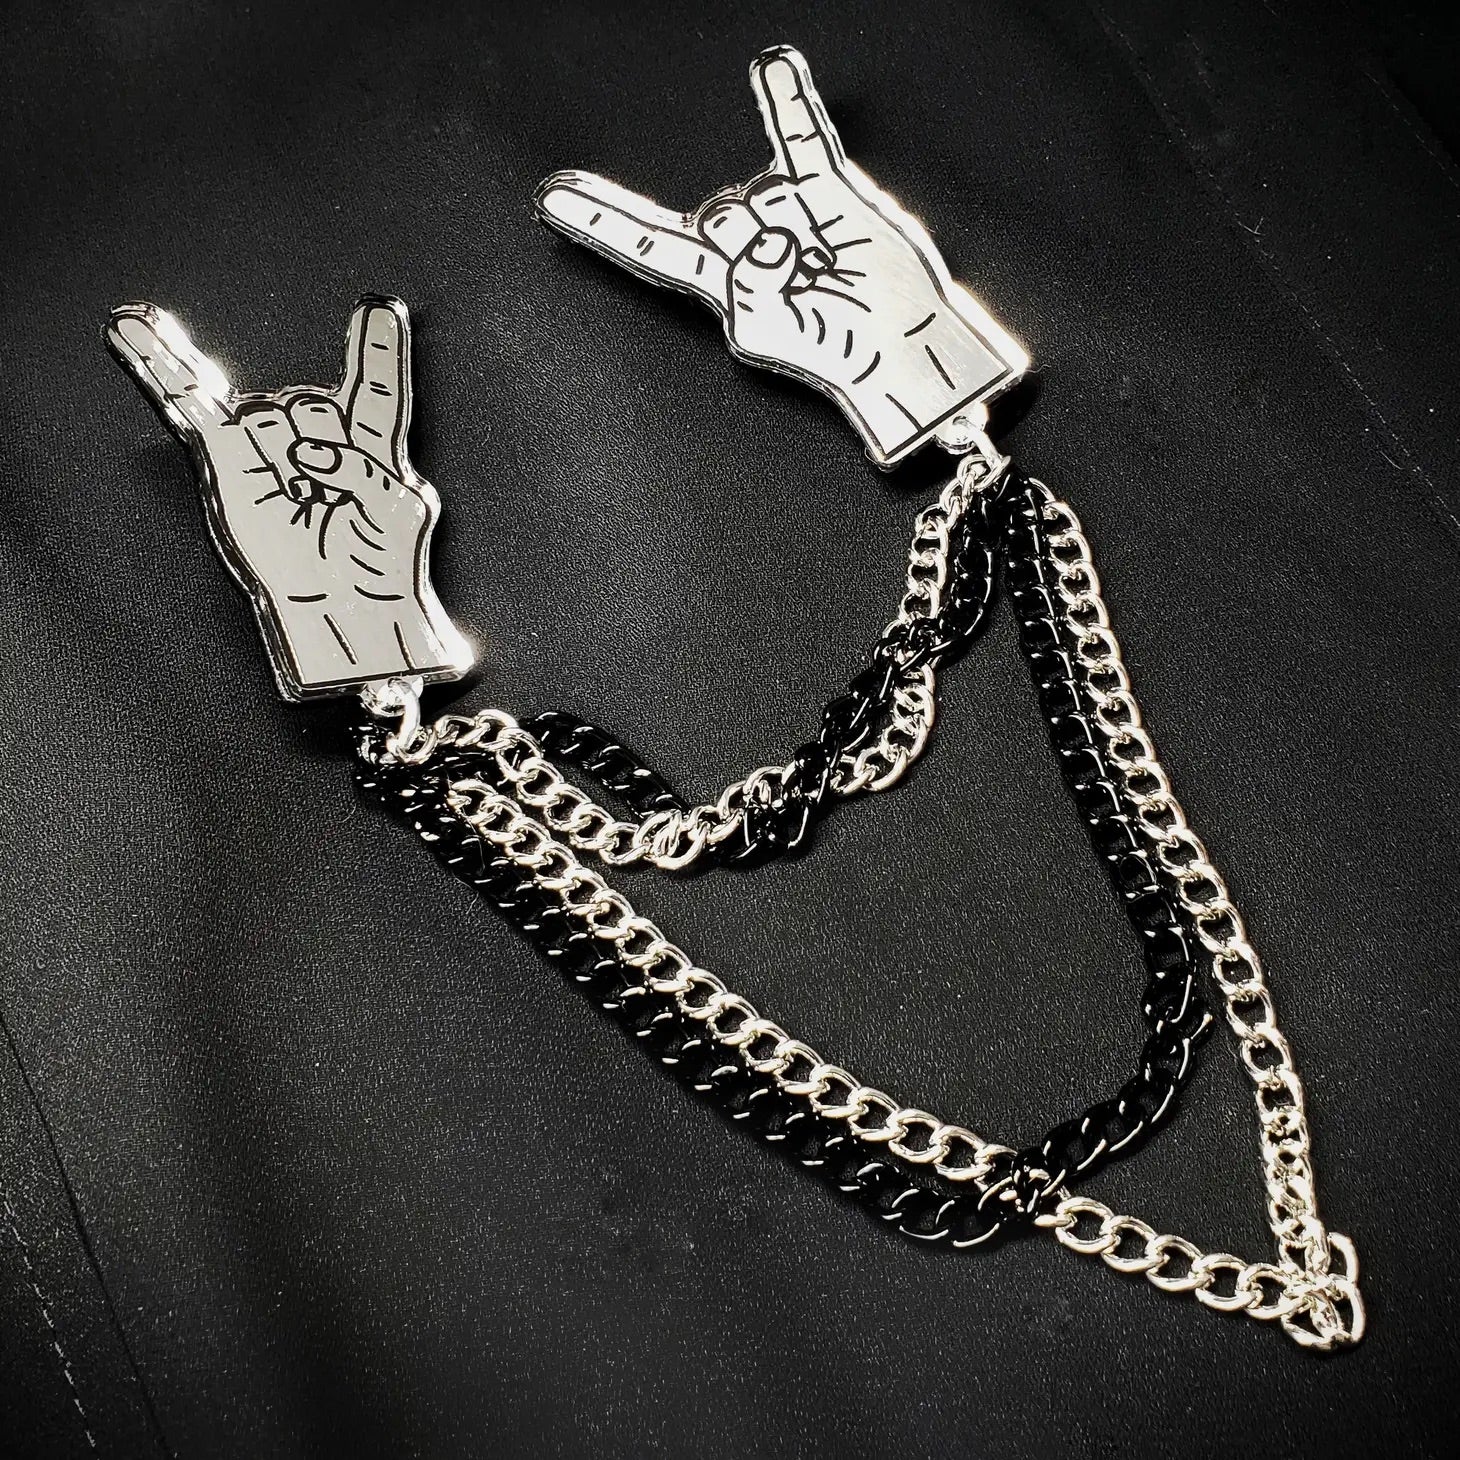 Laser cut silver mirrored acrylic hands throwing metal horns connected by 4 black and silver cable link chains. Shown laying flat